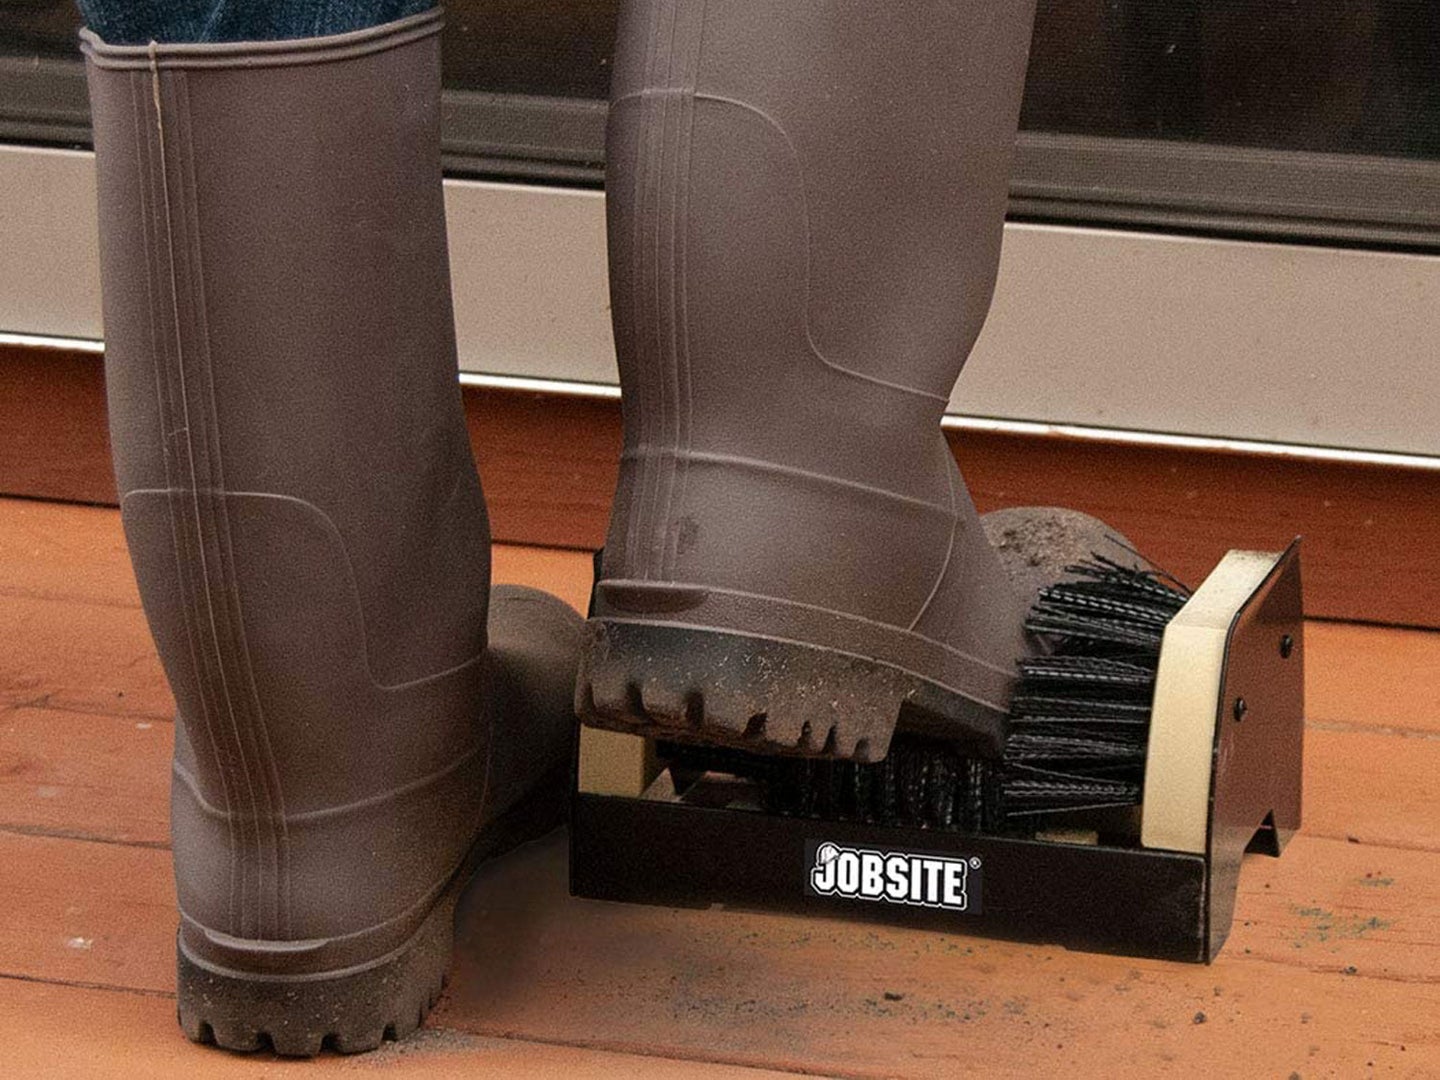 Job Site boot cleaner